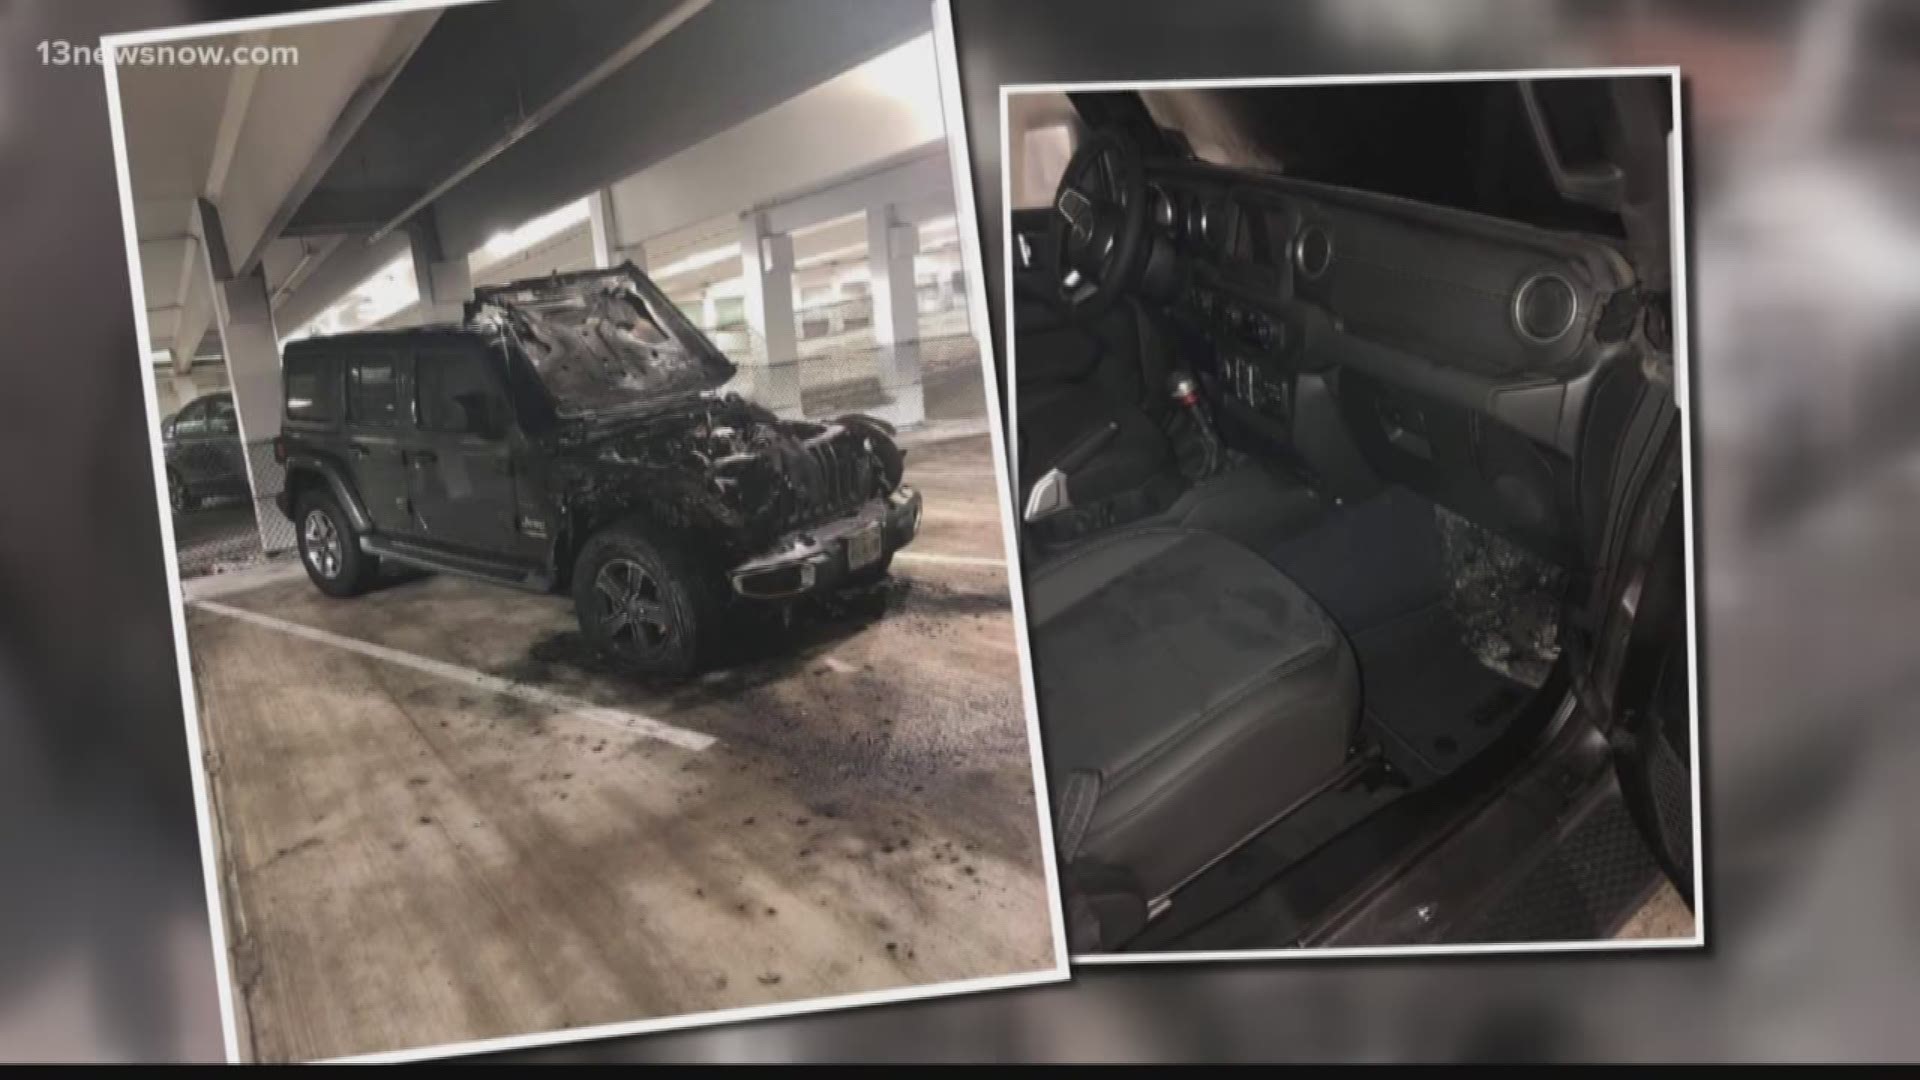 Only on 13News Now, a Navy sailor spoke with Steven Graves about how someone set his car on fire inside a Norfolk city parking garage.